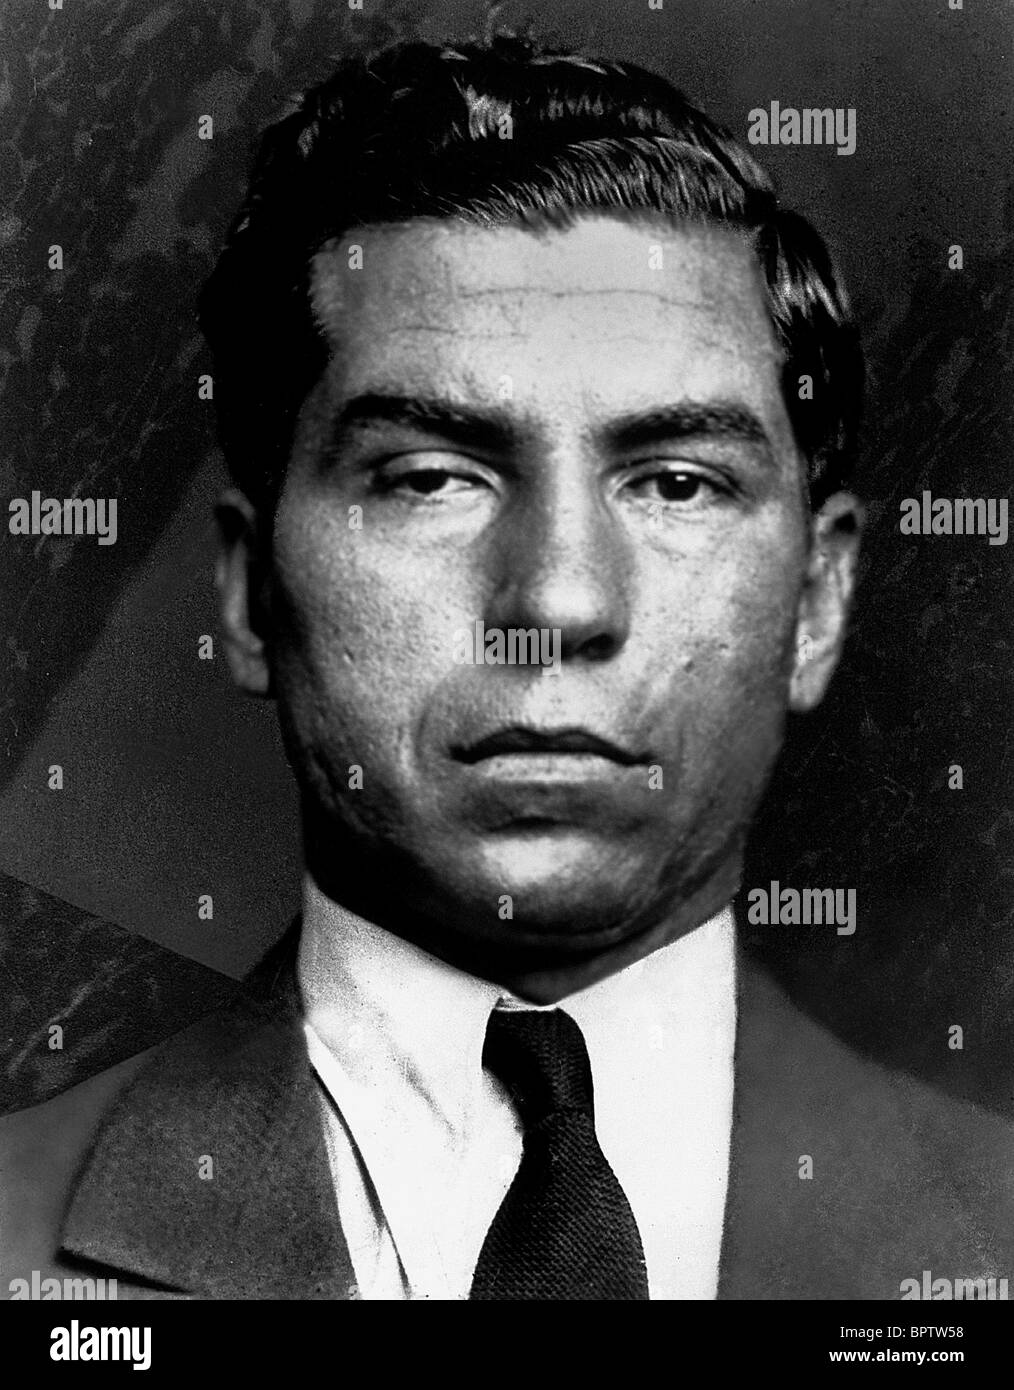 CHARLES LUCKY LUCIANO MAFIA GANGSTER (1936 Stock Photo - Alamy